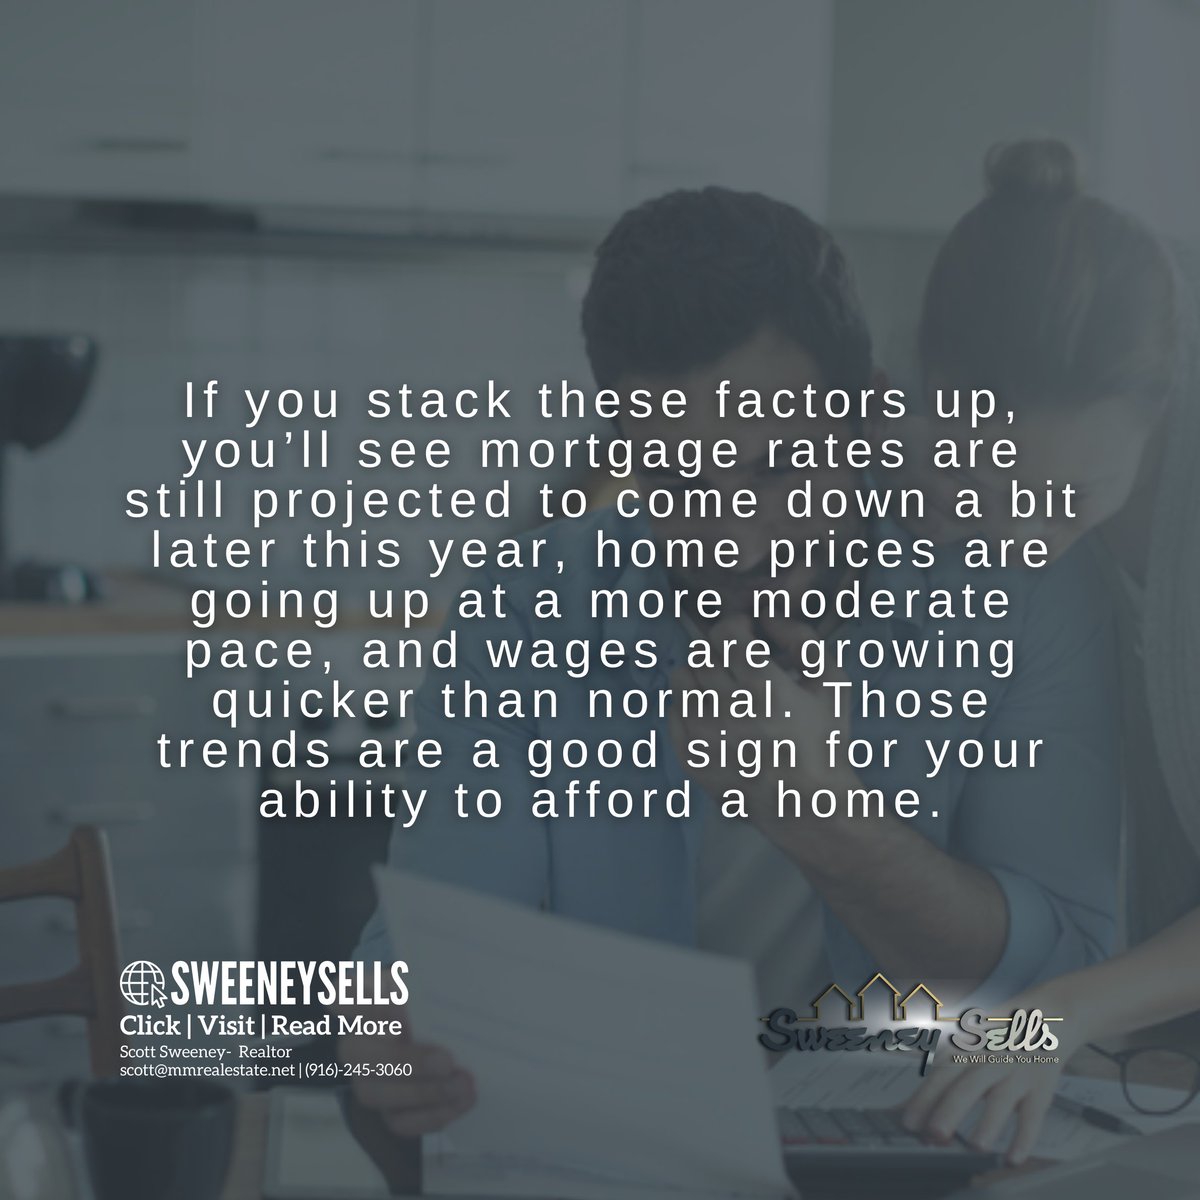 Is It Getting More Affordable To Buy a Home?
🔎Click below to read more, call/text us at (916)-245-3060
💻 | sweeneysells.com
#MMRealEstate #realtor #realestateagent #sweeneysells #listwithsweeney #listingspecialist #sweeneyworldwide